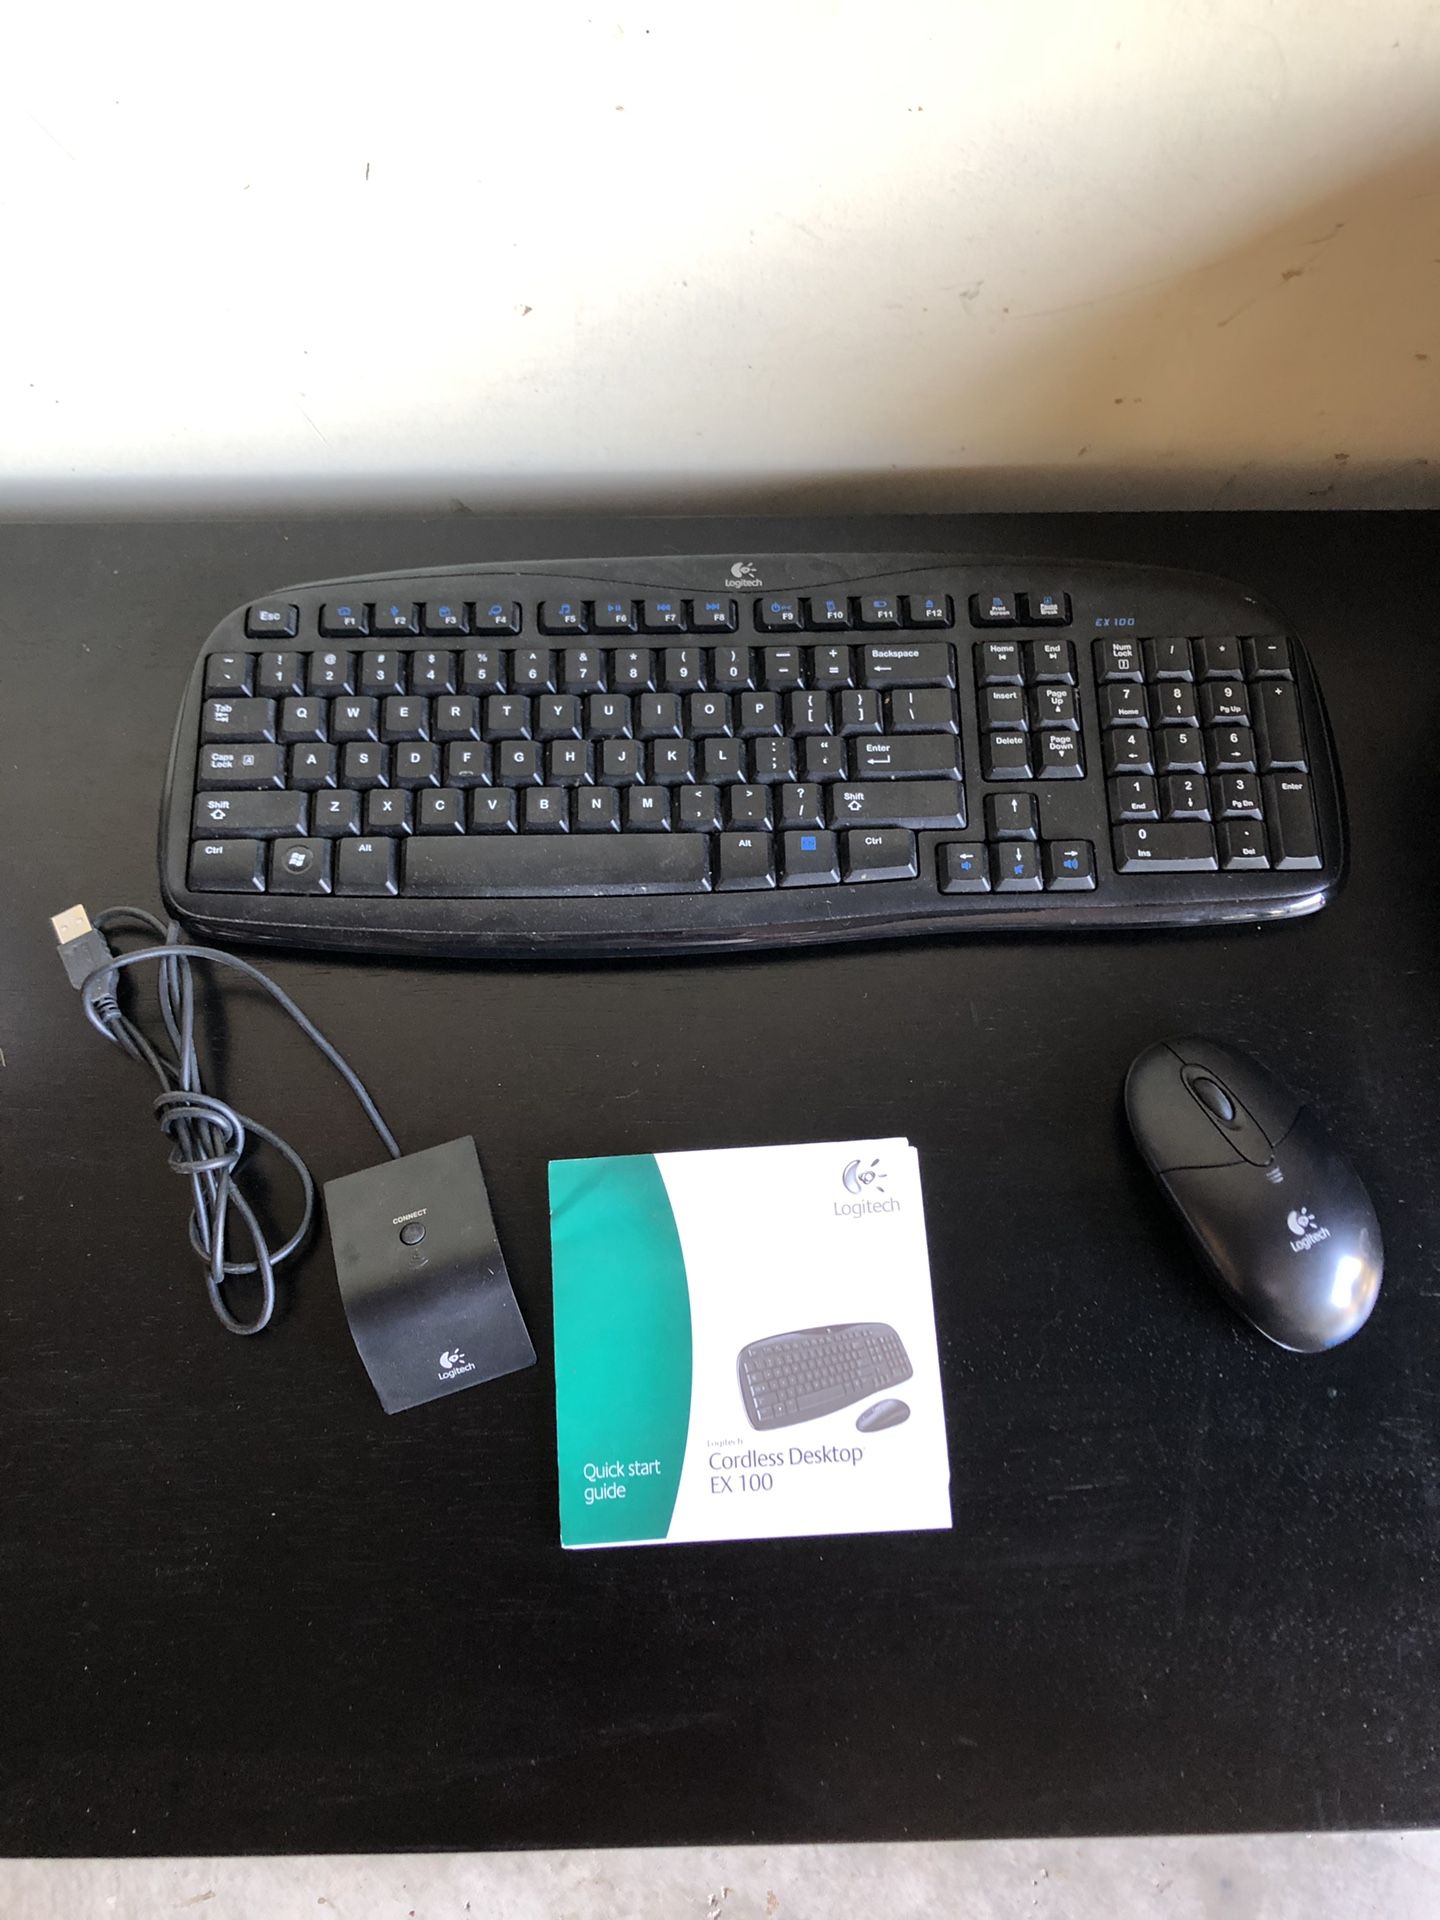 Wireless keyboard and mouse. Excellent condition. $15